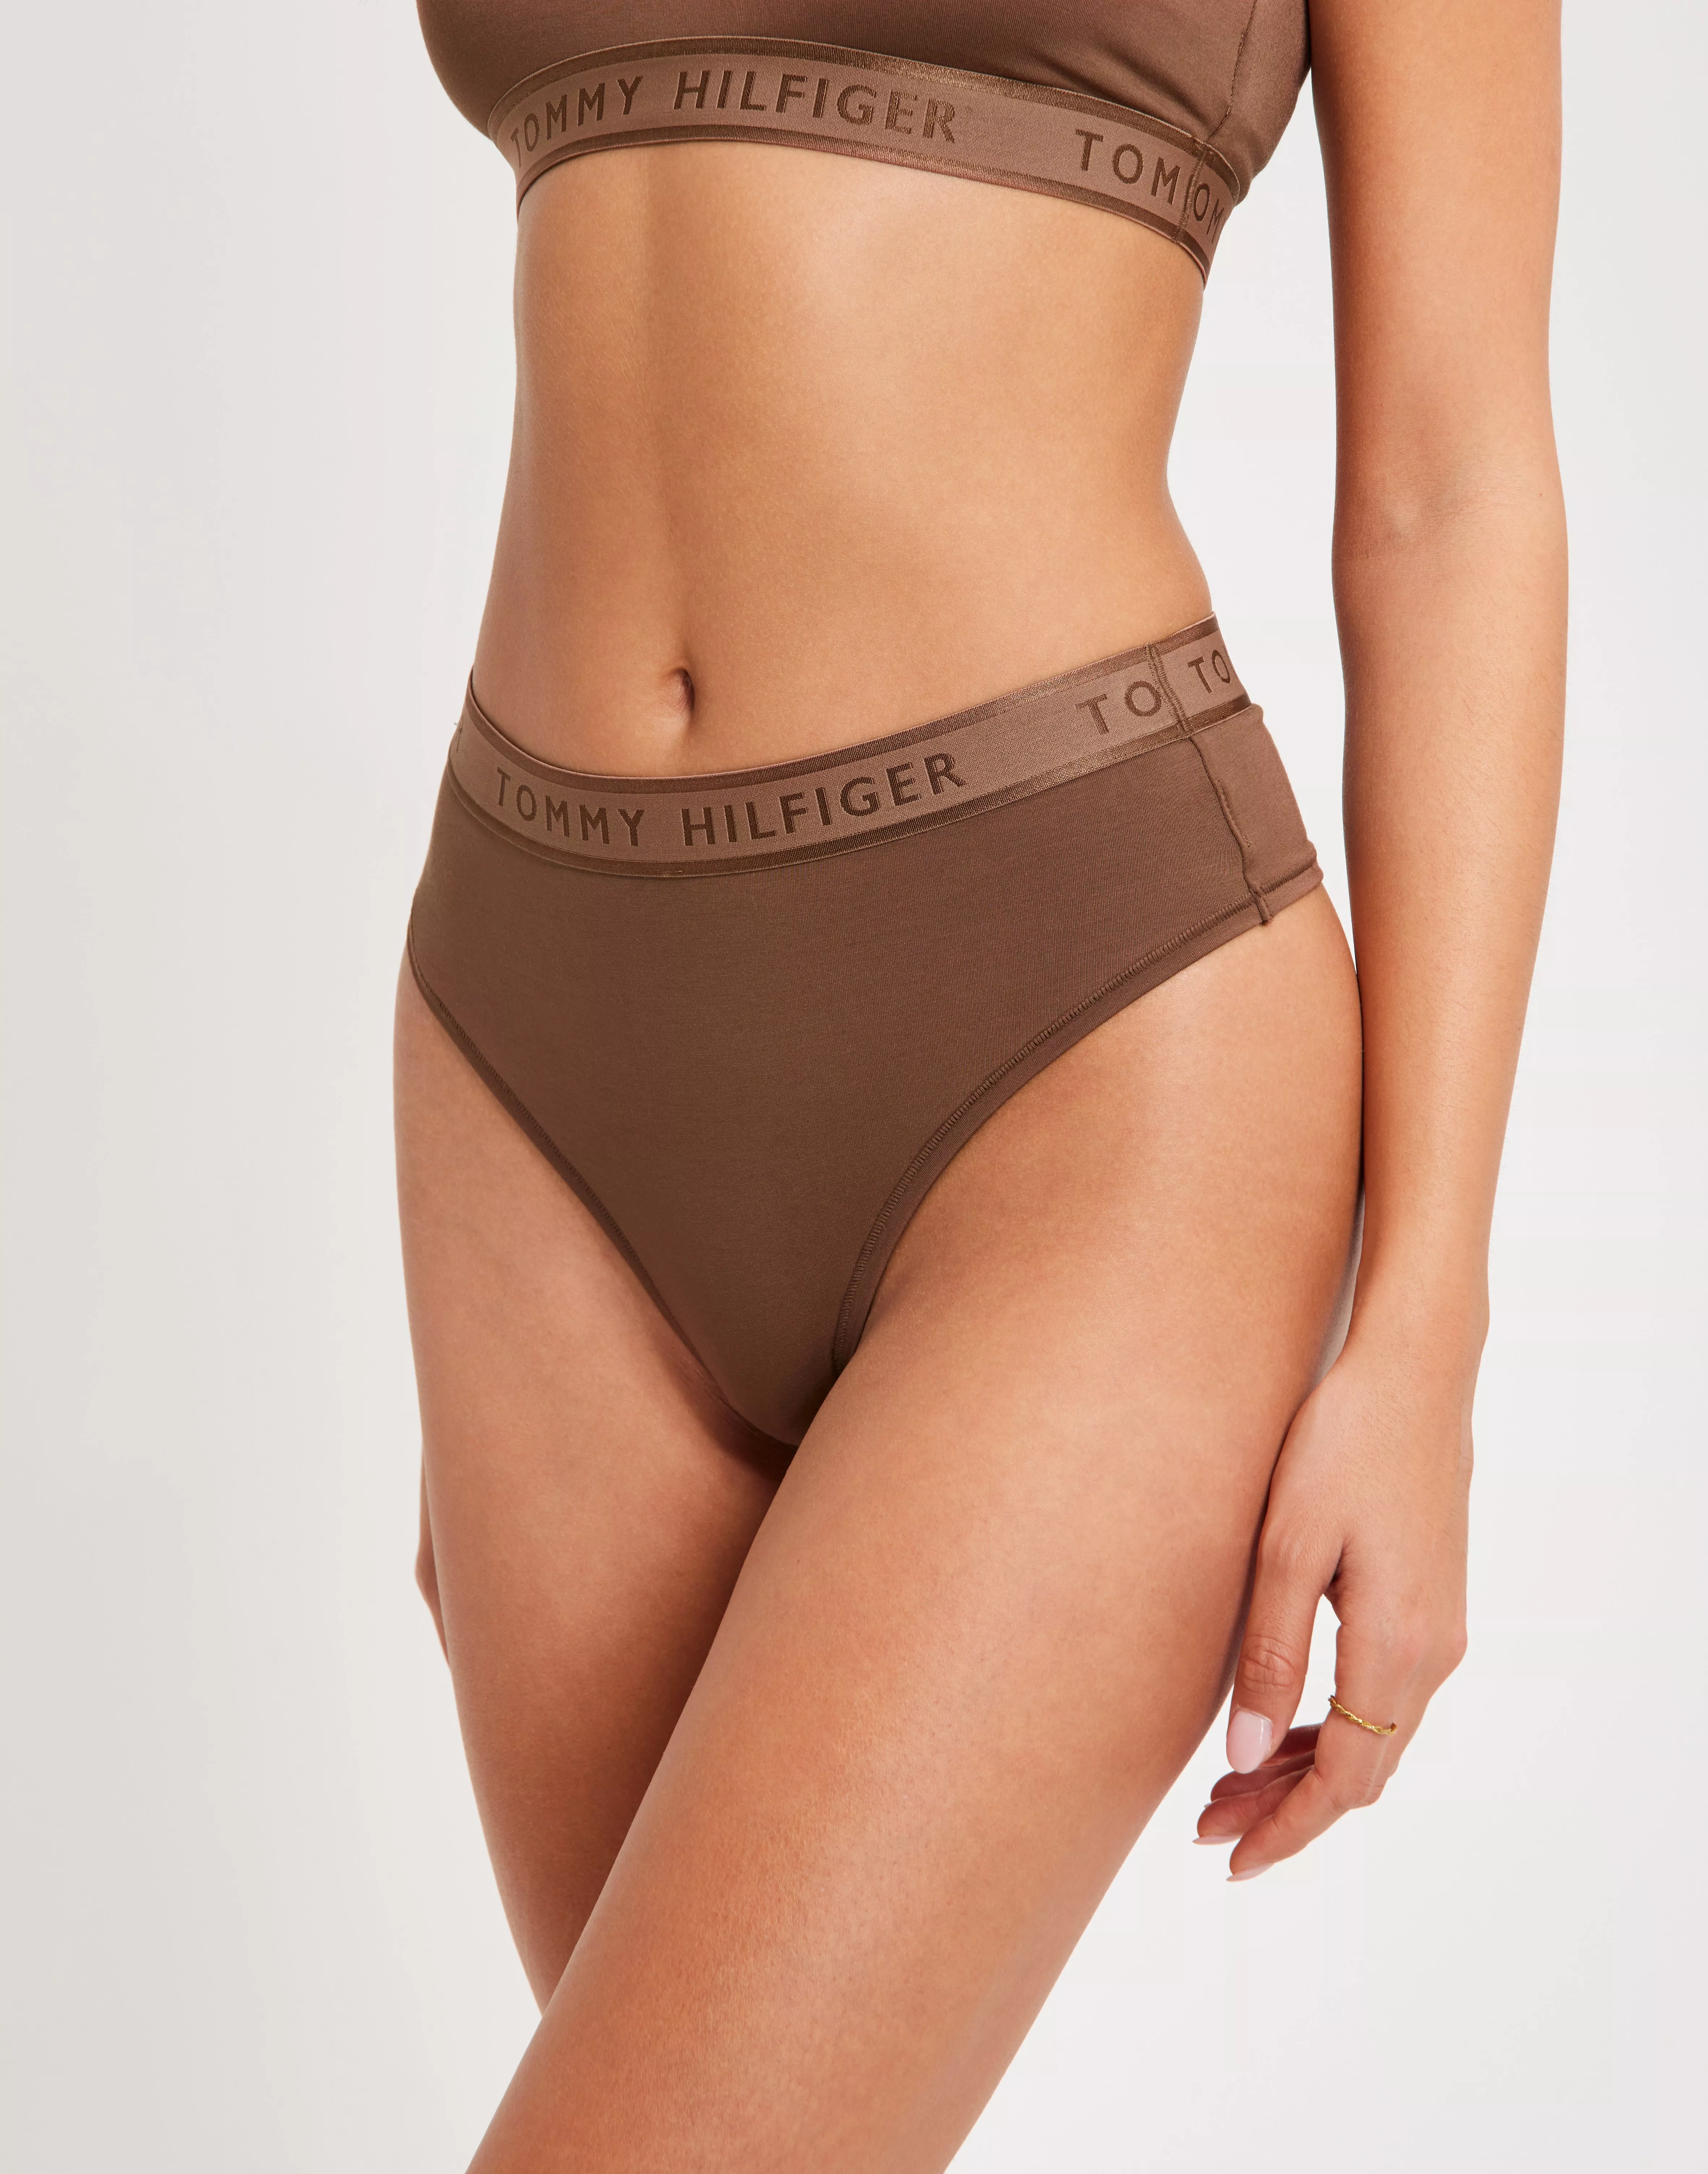 indgang snave filosofi Køb Tommy Hilfiger Underwear HIGH WAIST THONG - Cacao | Nelly.com